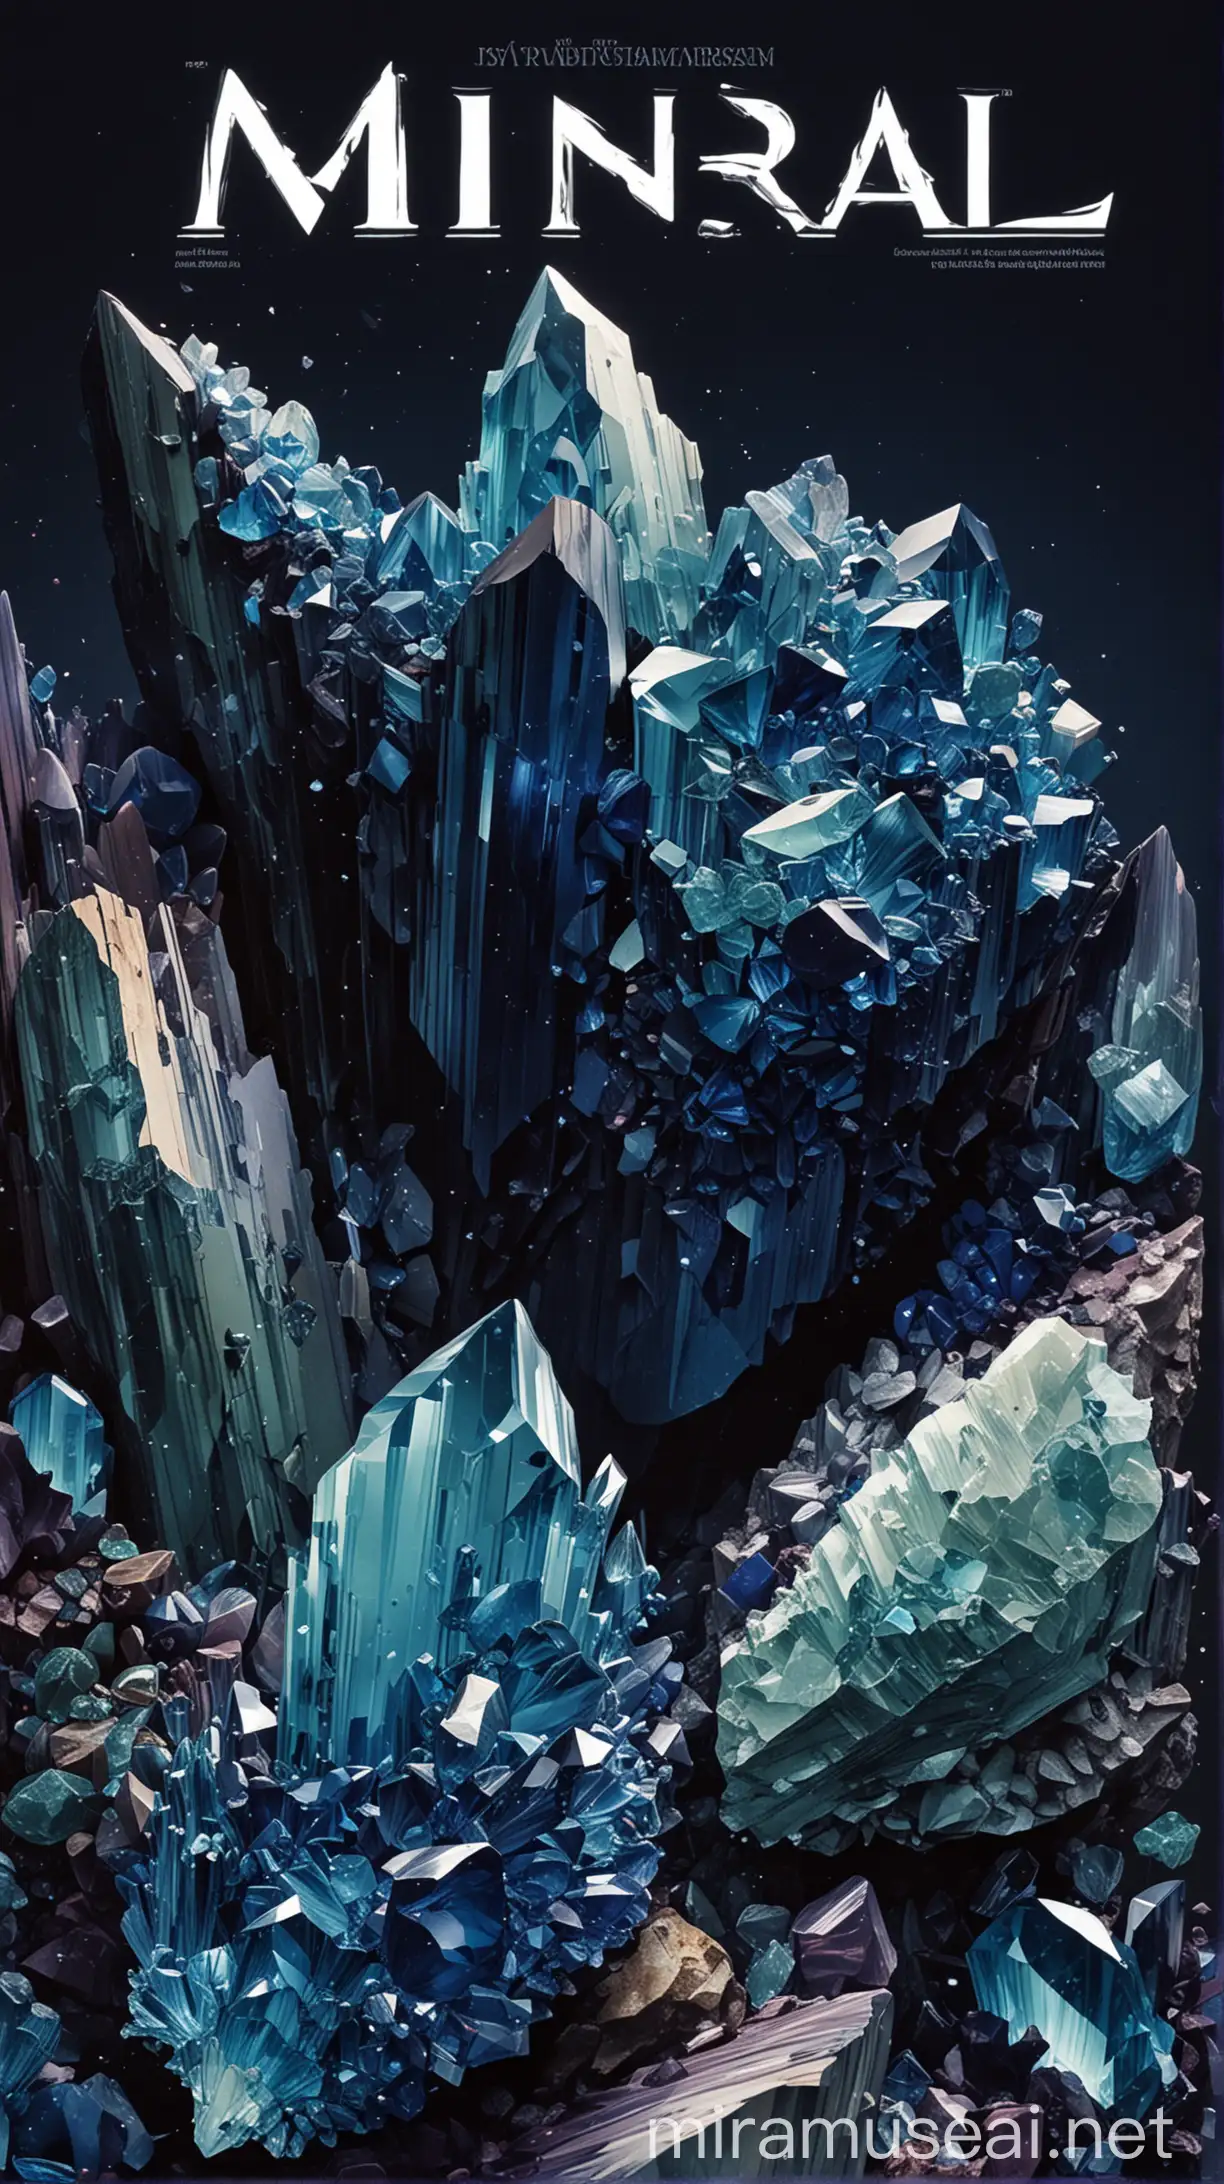 Mesmerizing Crystal Formation Illuminated Minerals on a Deep Blue Background